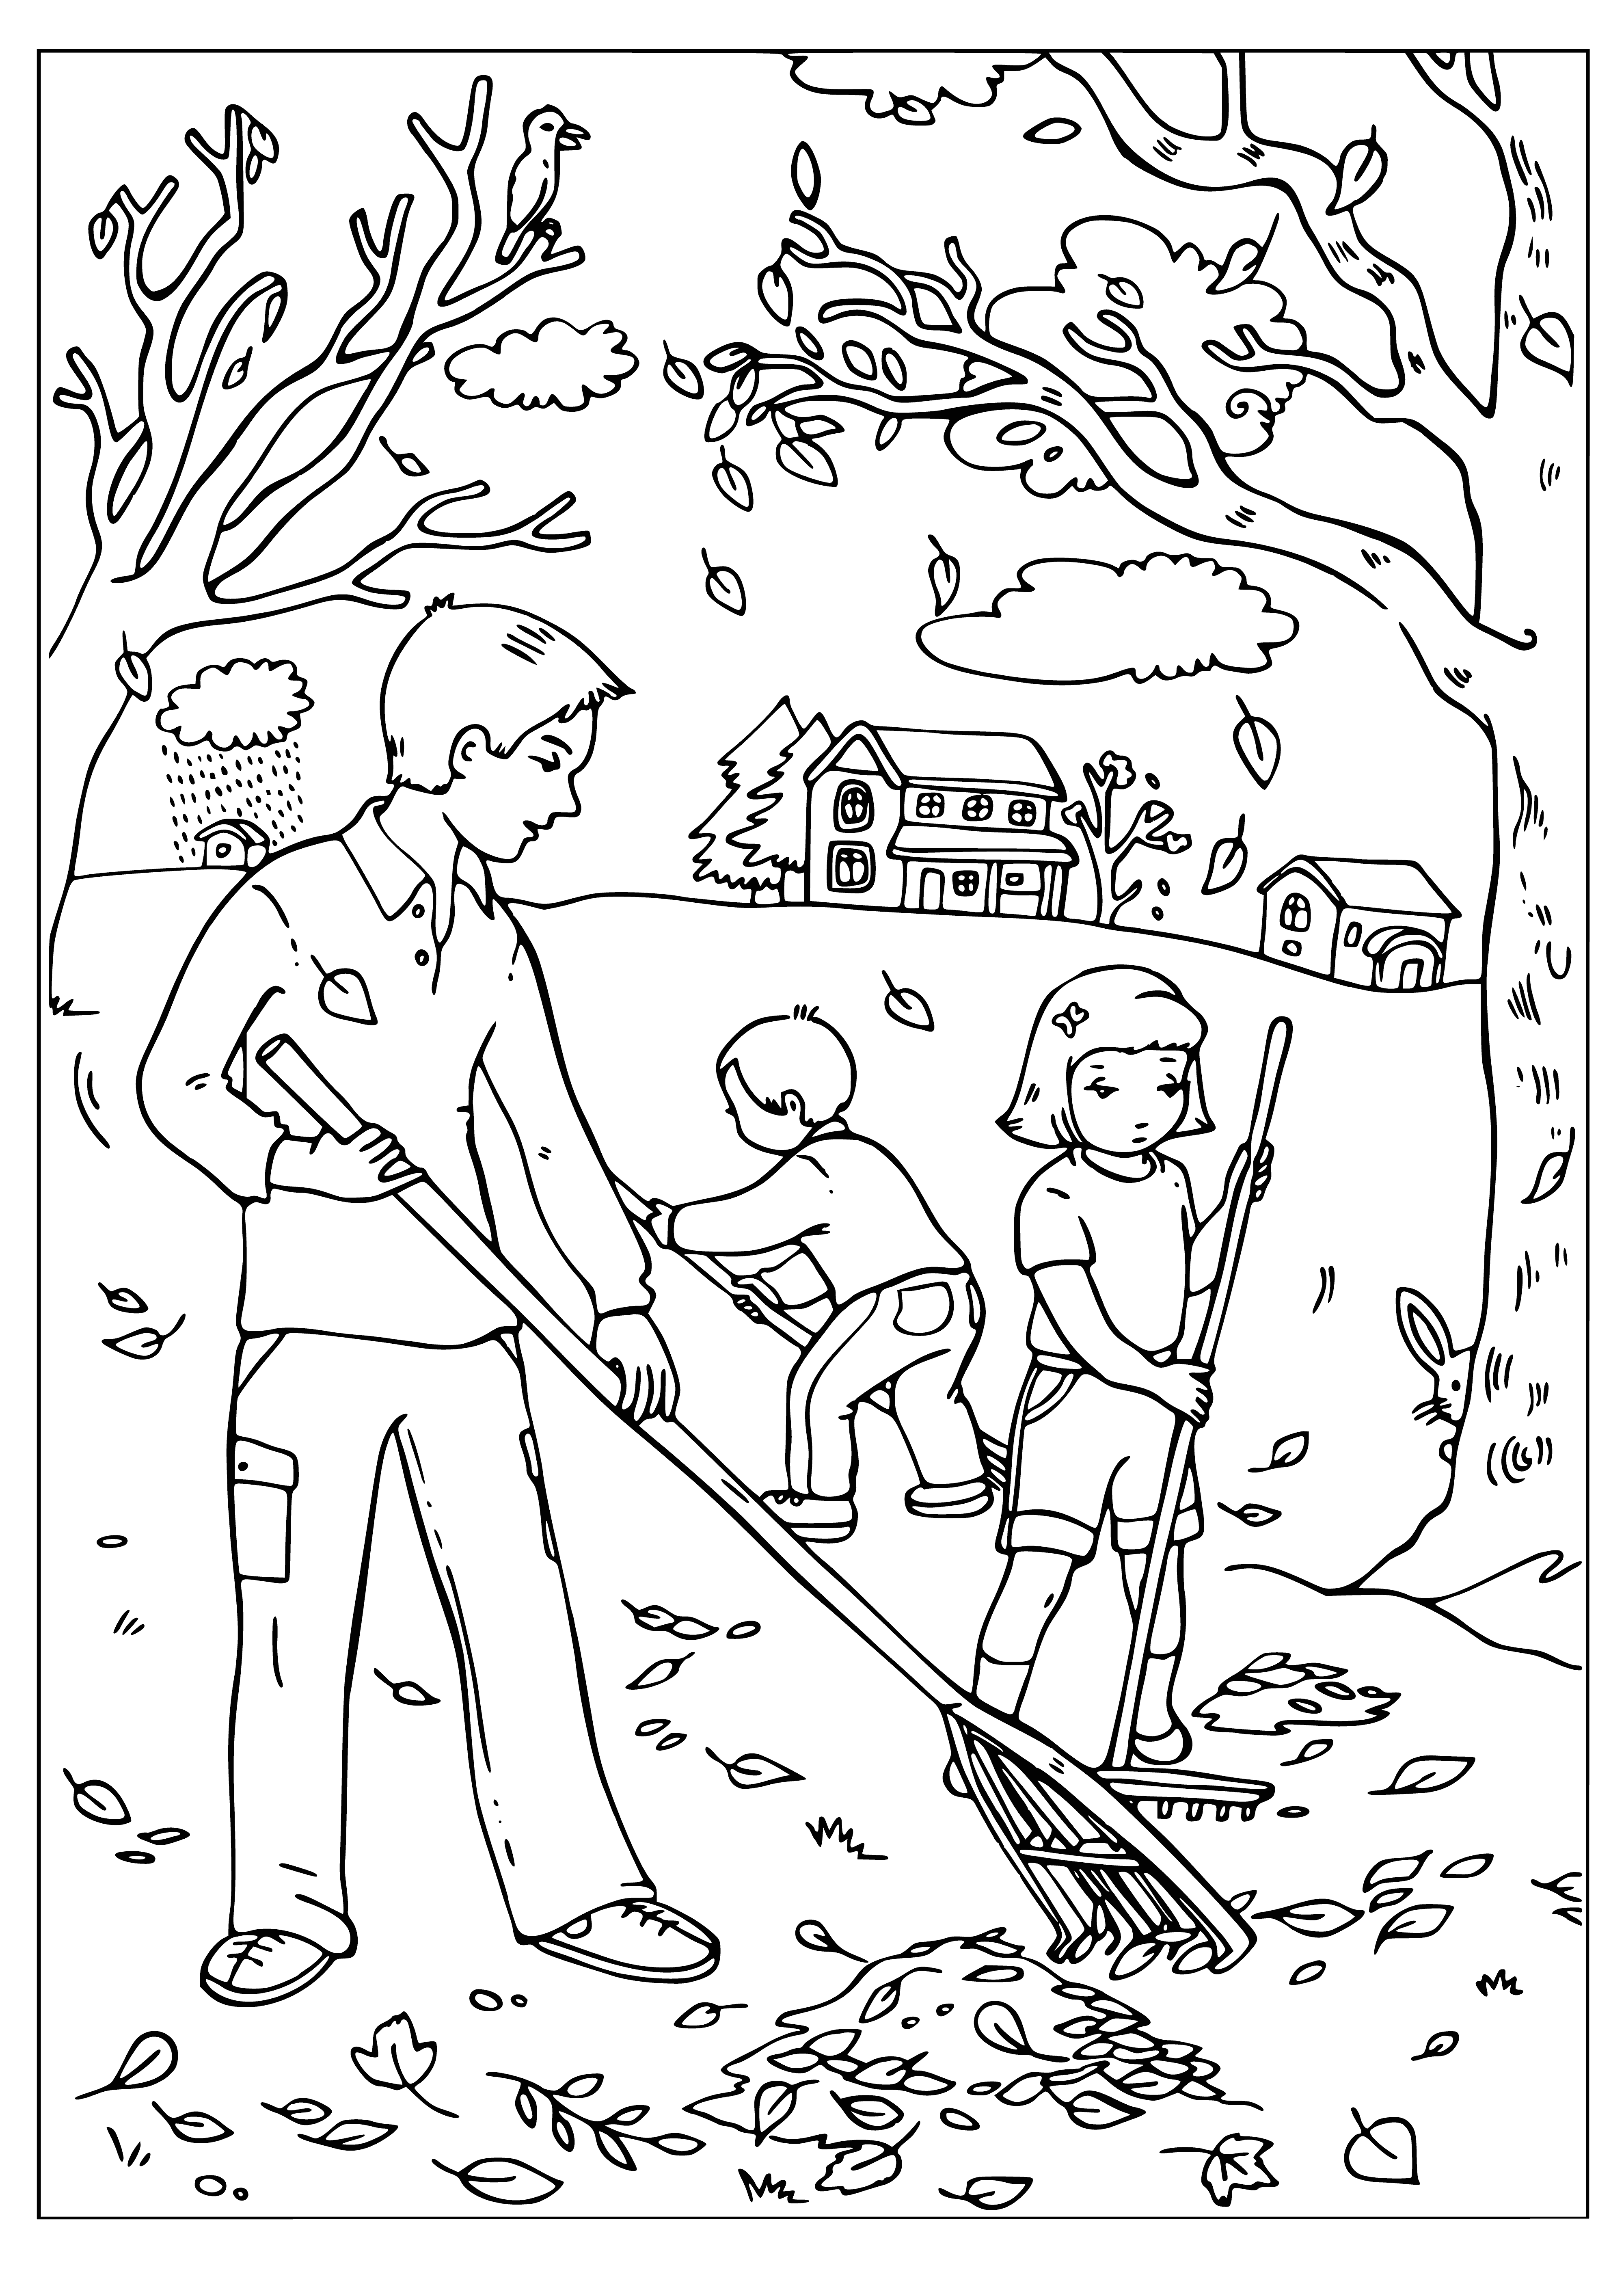 coloring page: Leaves turning brown, piling up and into bags; people are raking.